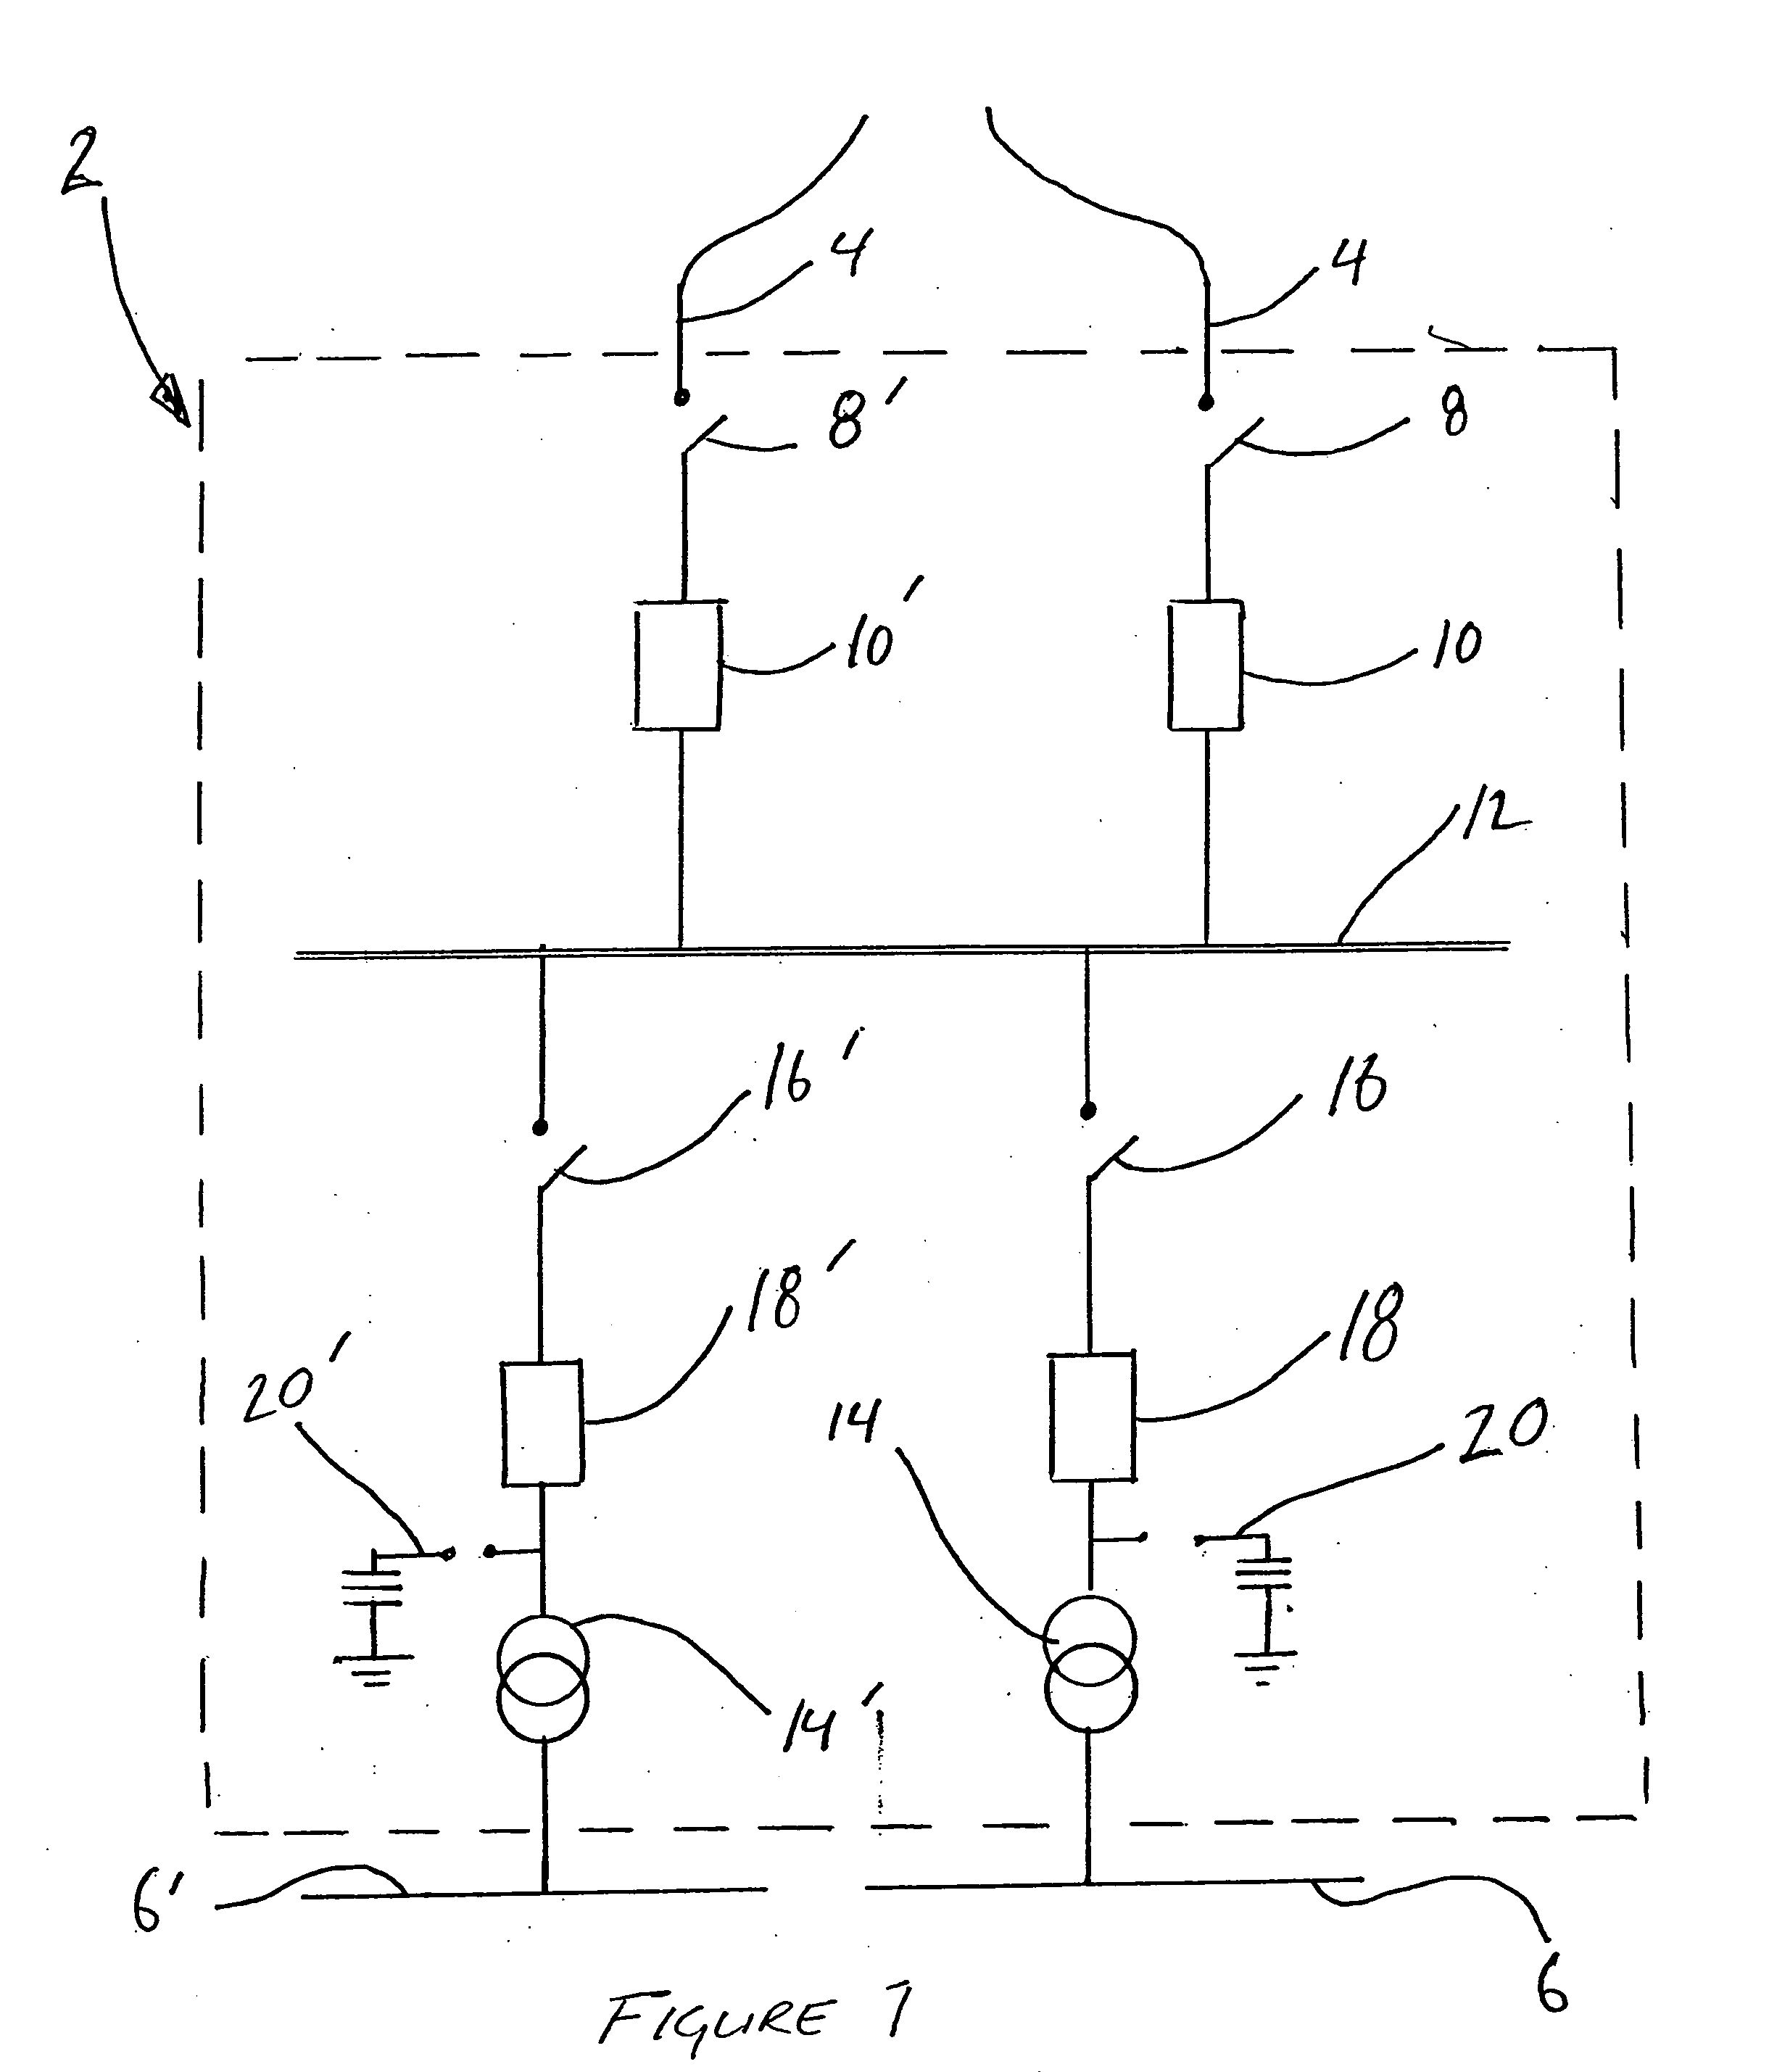 Method for tapping a high voltage transmission line and substation using the same